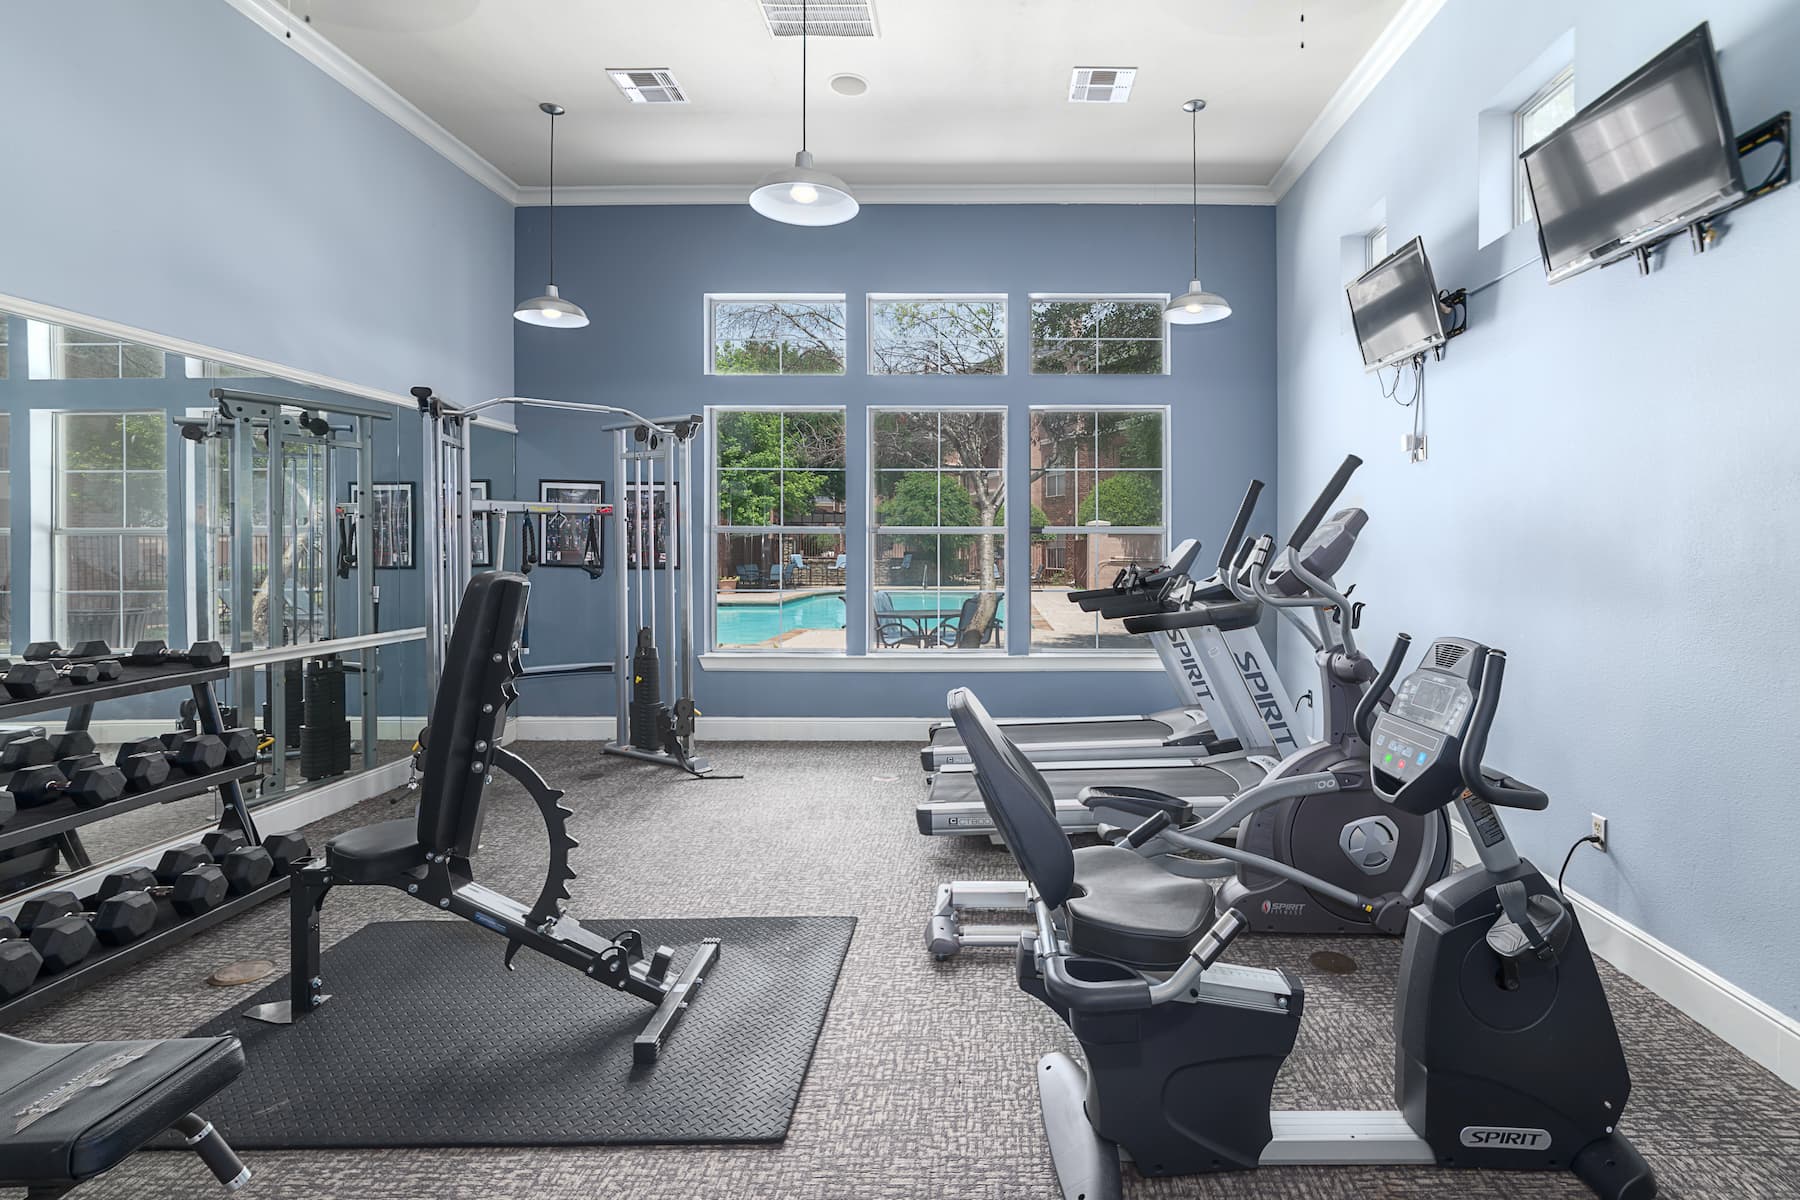 get your daily exercise routine done in our fitness room with modern equipment nearby our resort-style pool